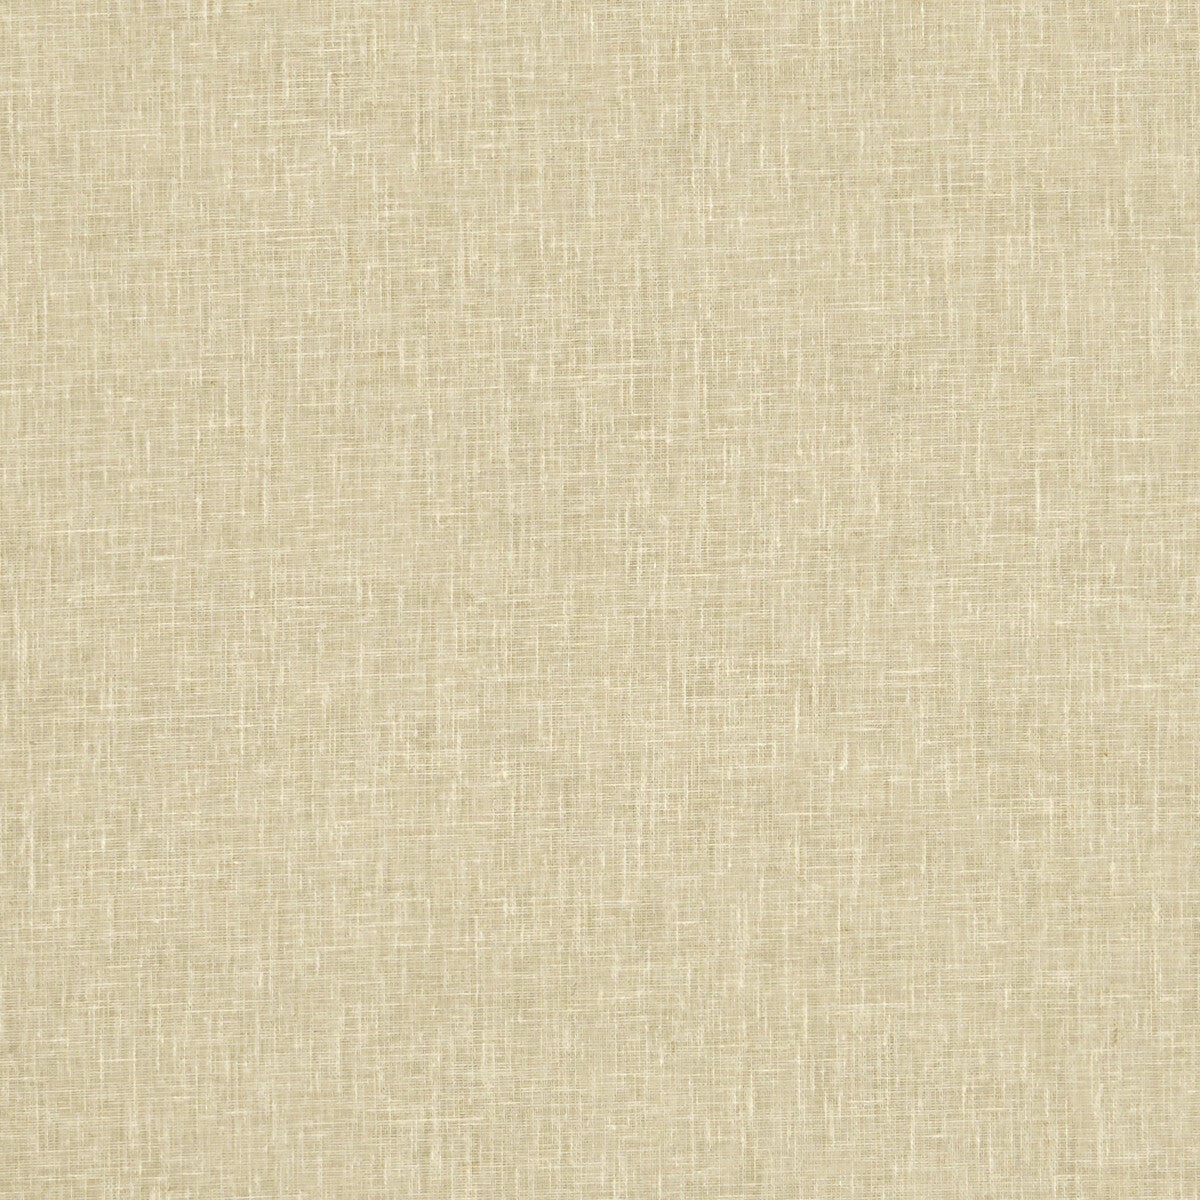 Midori fabric in sand color - pattern F1068/41.CAC.0 - by Clarke And Clarke in the Clarke &amp; Clarke Midori collection